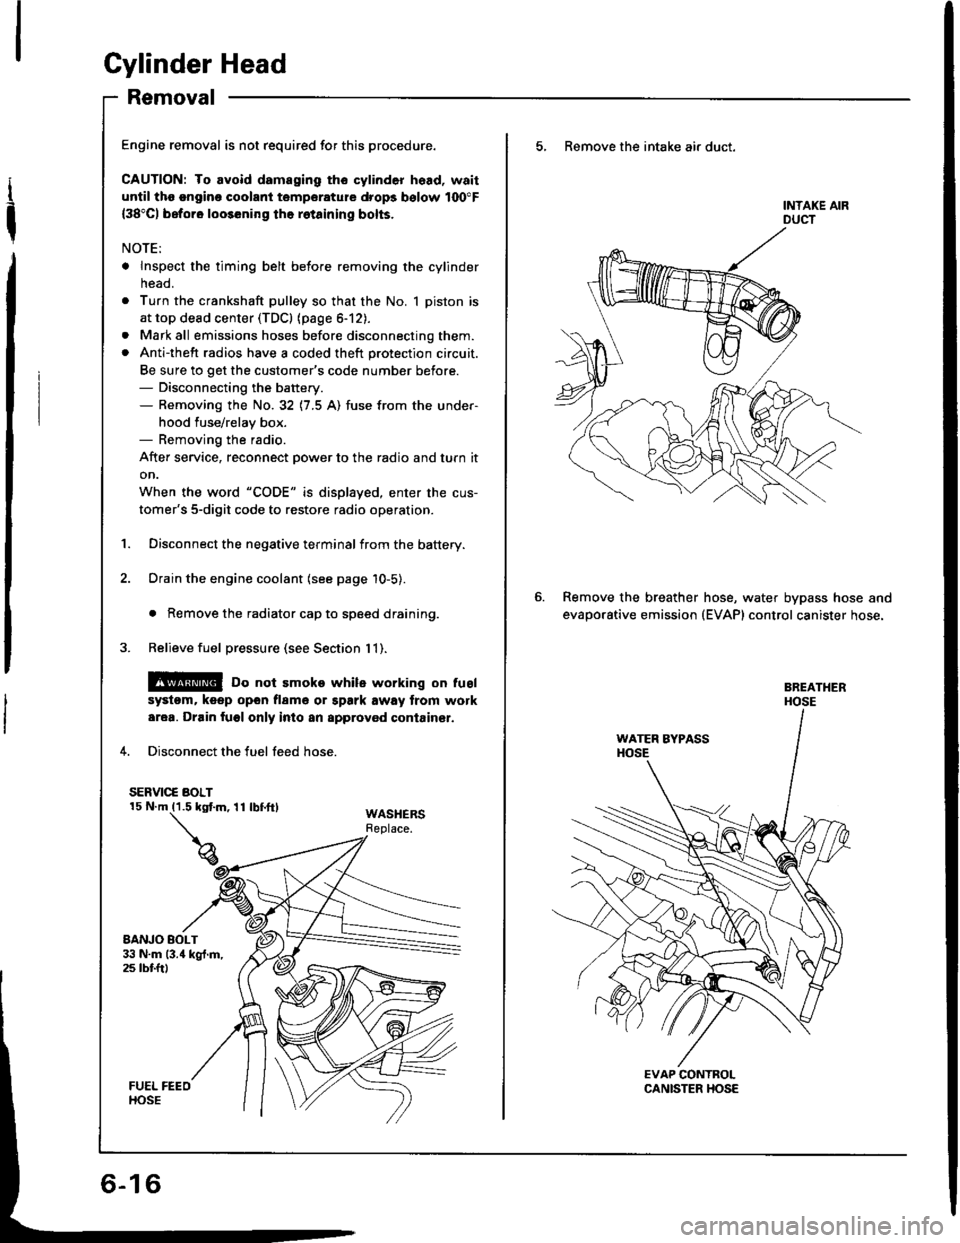 HONDA INTEGRA 1994 4.G Workshop Manual Gylinder Head
Removal
I
t
Engine removal is not required for this procedure.
CAUTION: To avoid damaging tho cylinder head, wait
until tho ongino coolant temporature drops bolow 100"F
{38"C) beforo loo